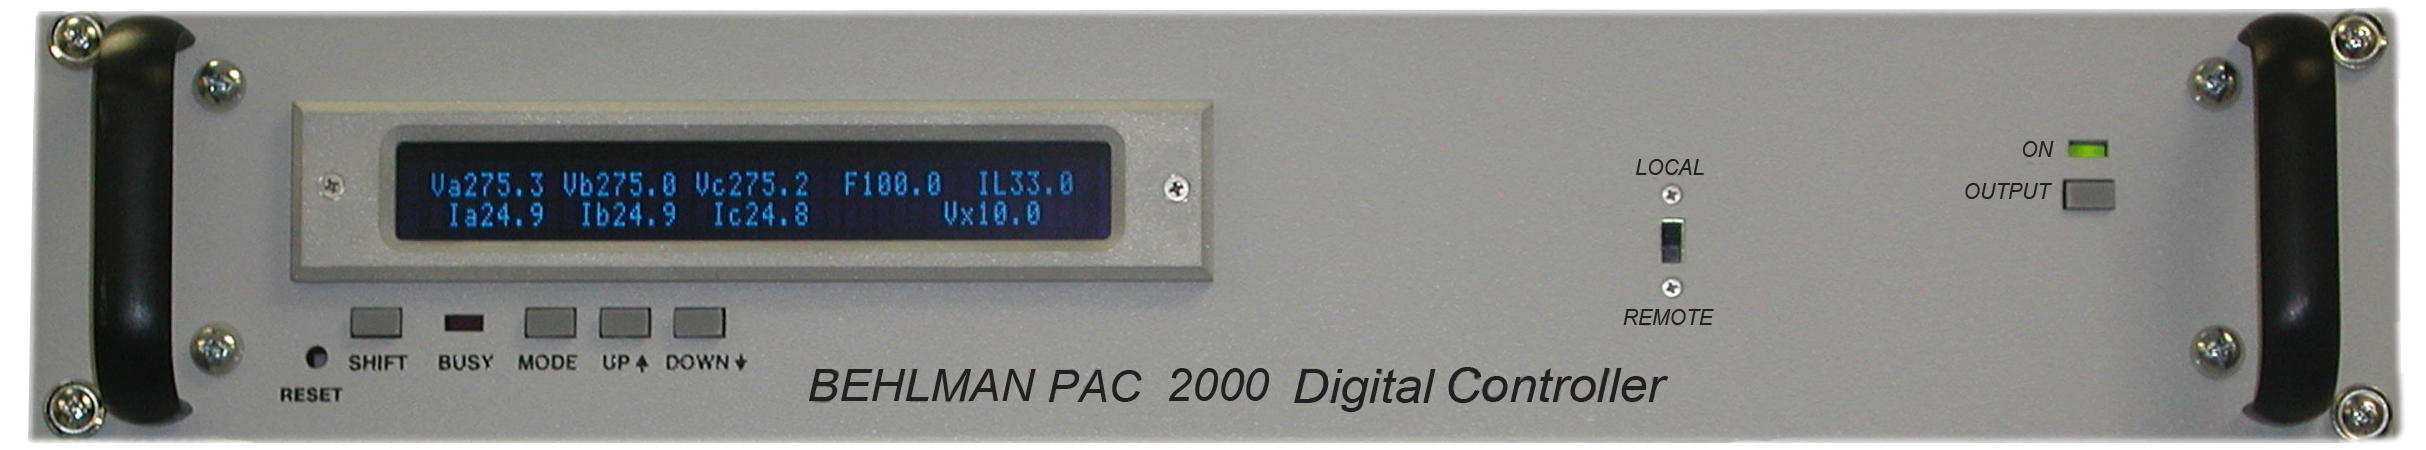 Behlman PAC2000: Microprocessor Controller with measurement capability.